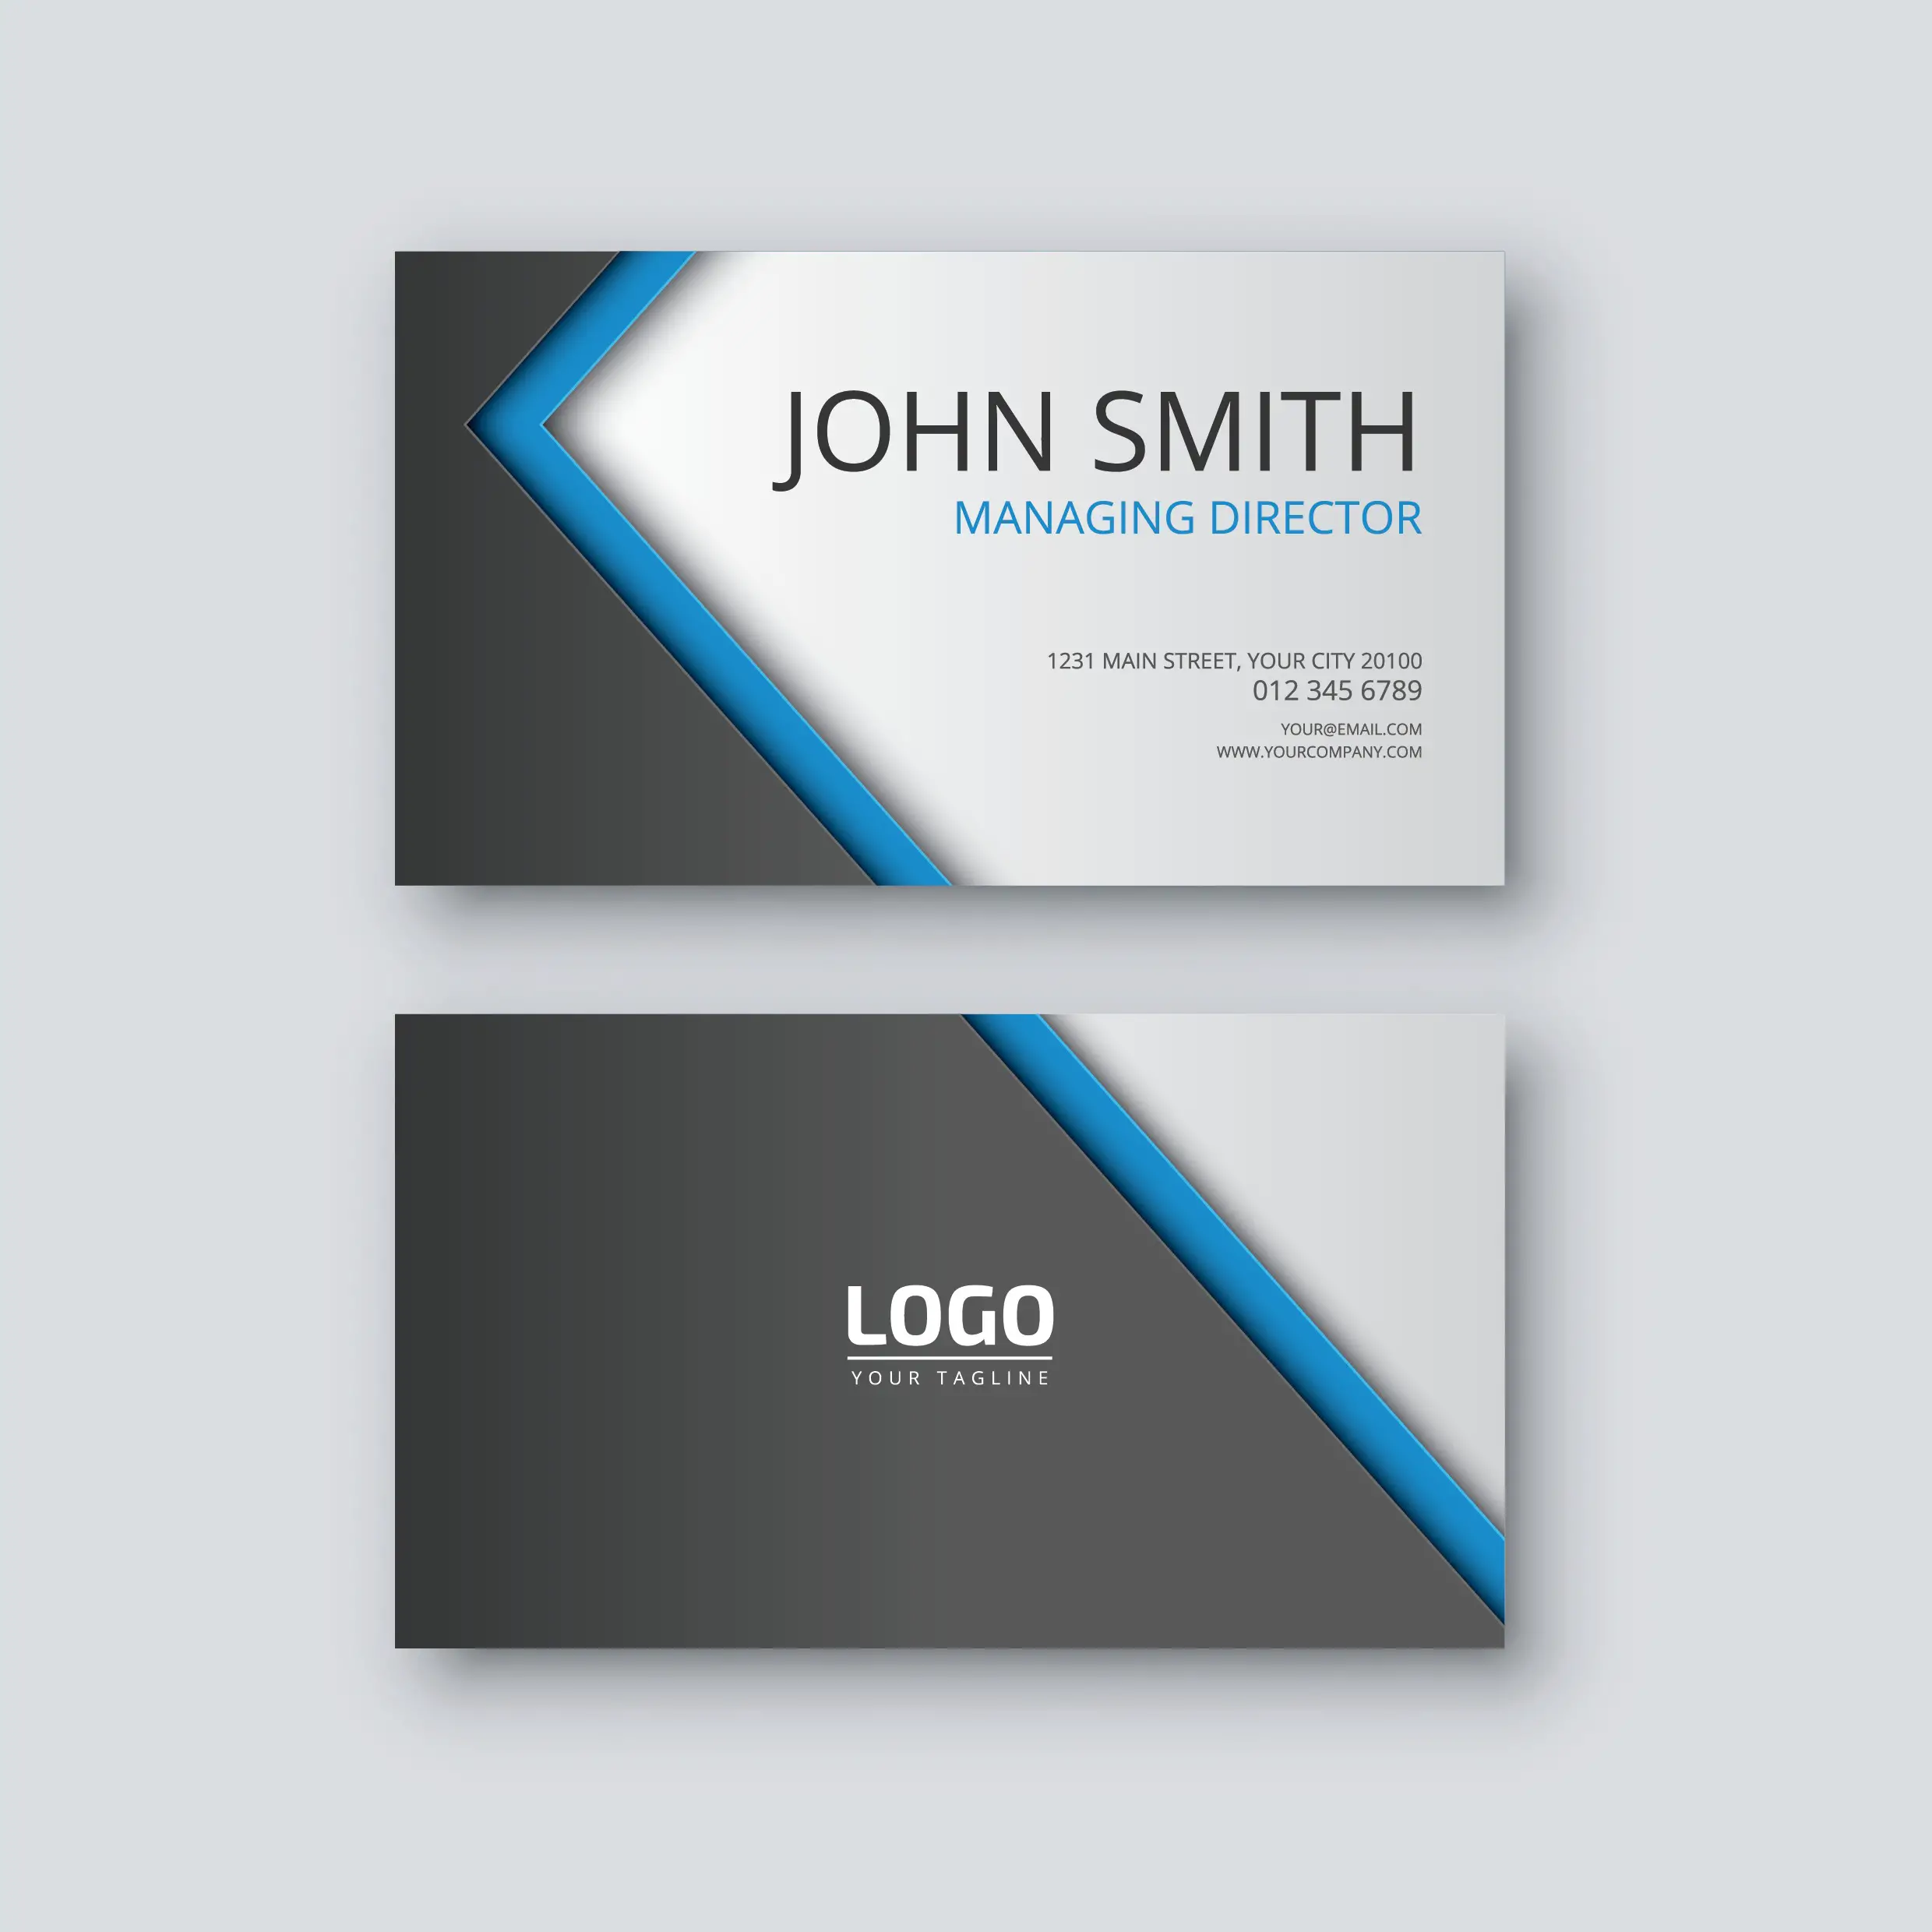 how to design business cards in photoshop 6